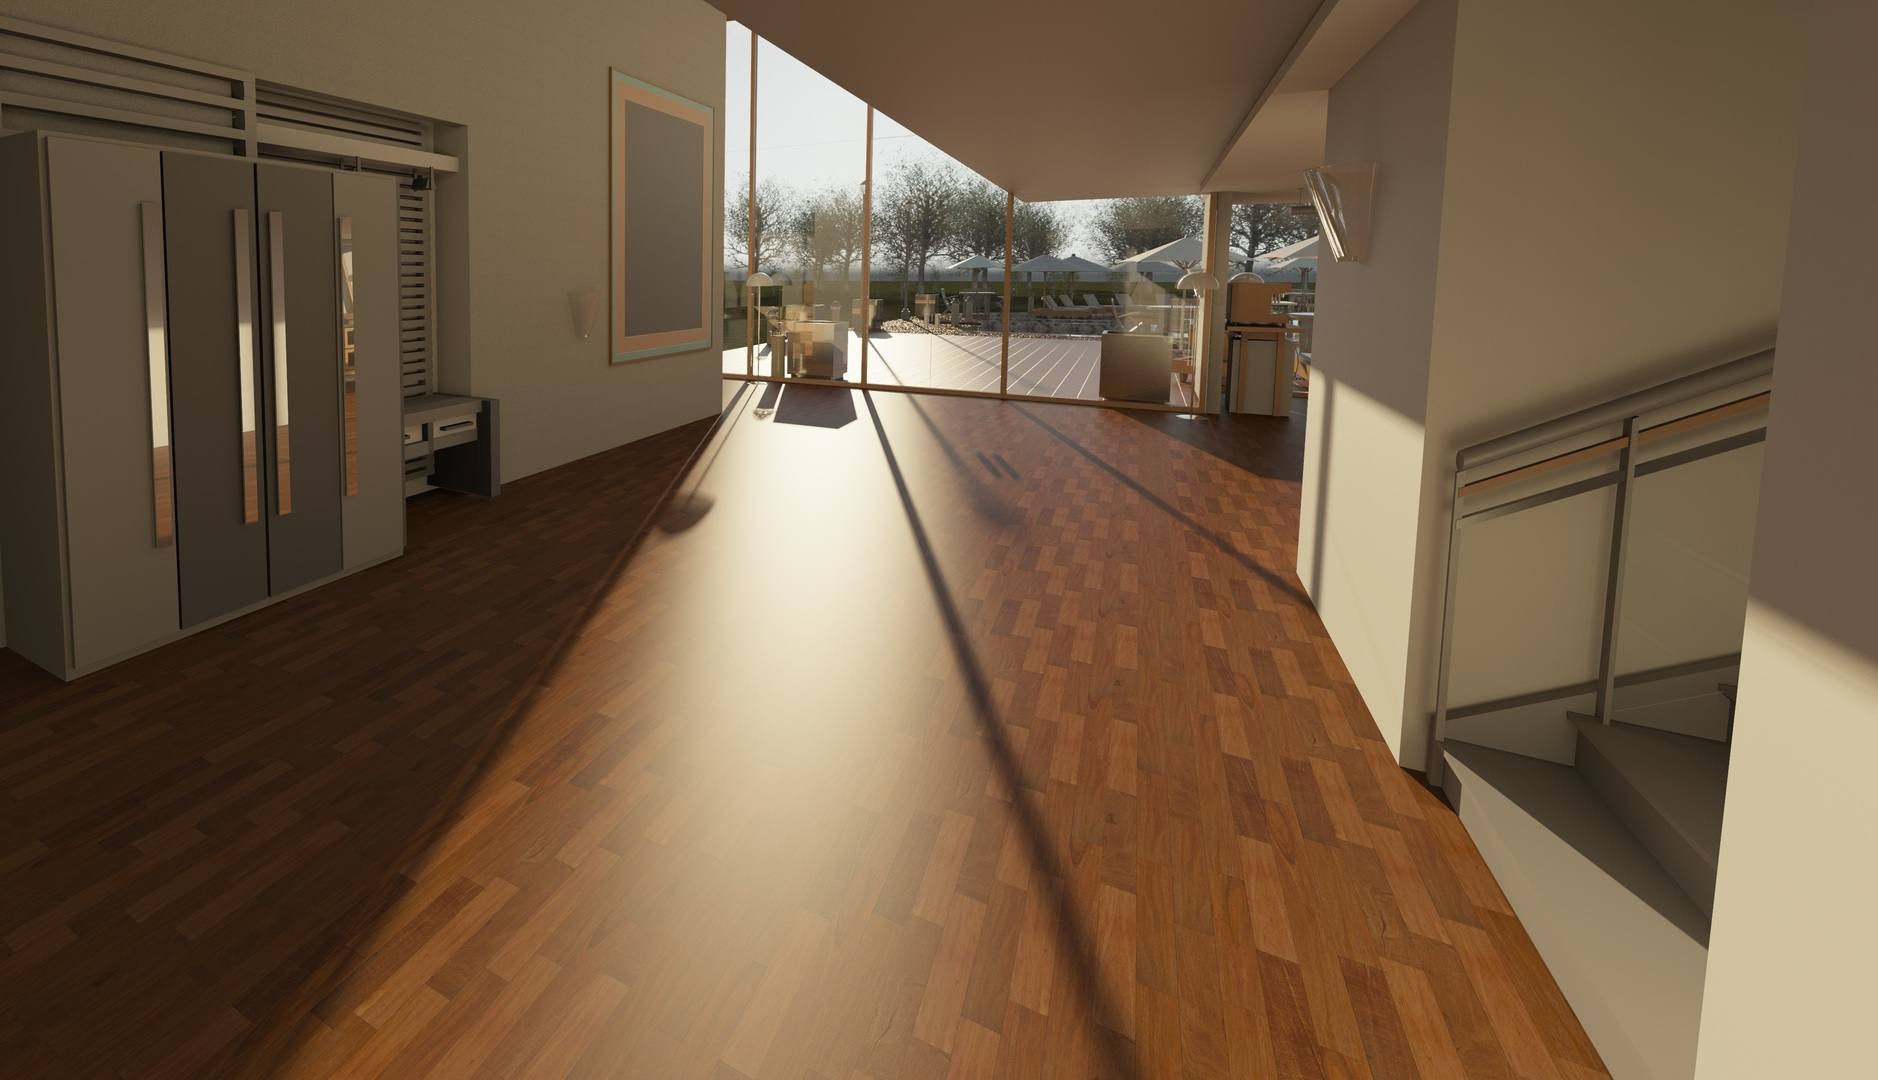 11 Elegant Hardwood Floor Estimate Sheet 2024 free download hardwood floor estimate sheet of common flooring types currently used in renovation and building regarding architecture wood house floor interior window 917178 pxhere com 5ba27a2cc9e77c00503